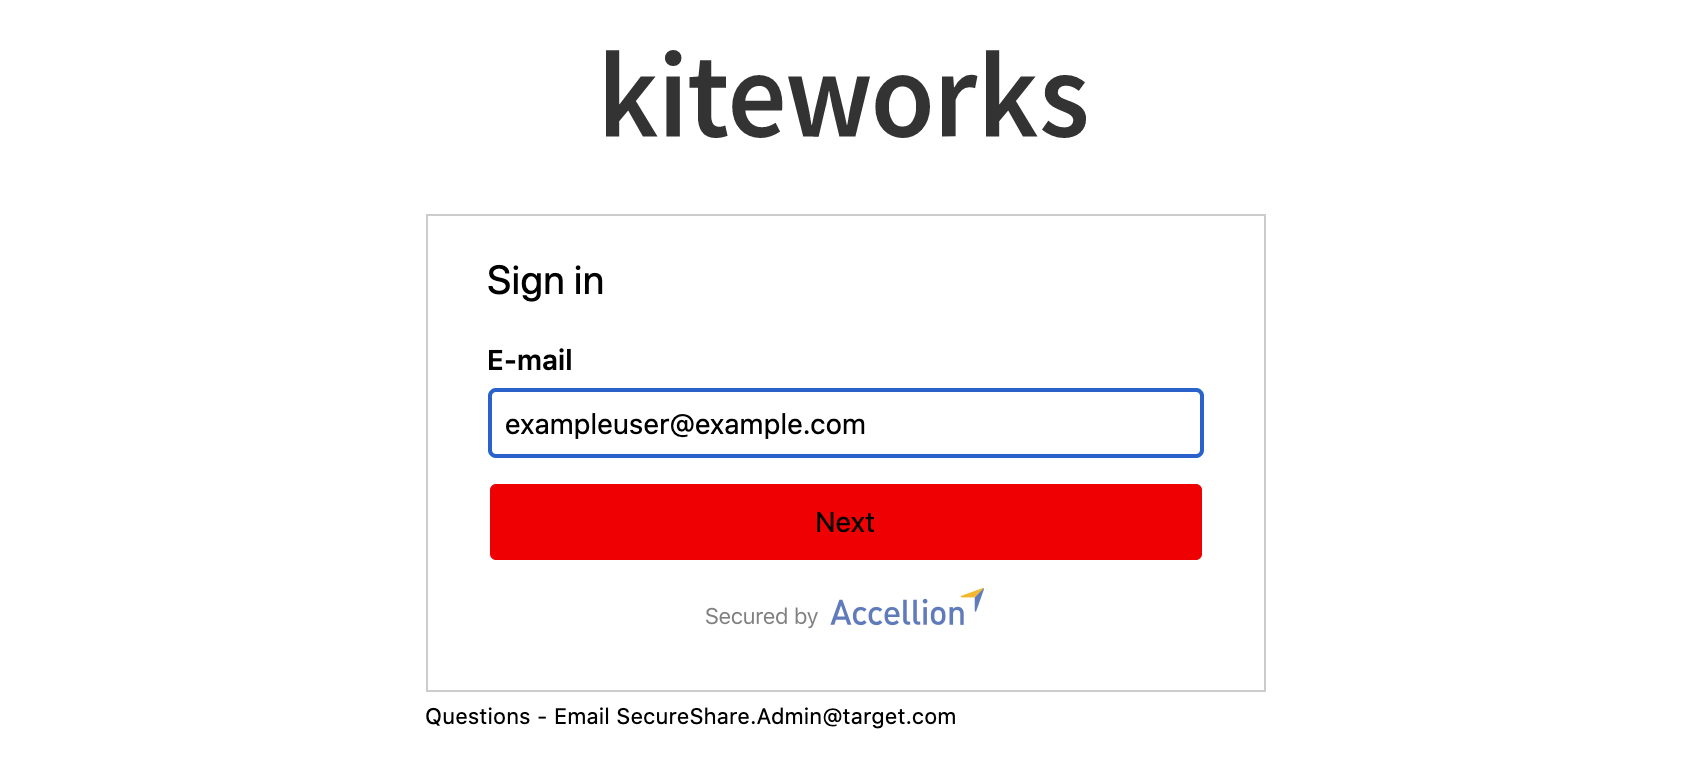 Kiteworks_email.png